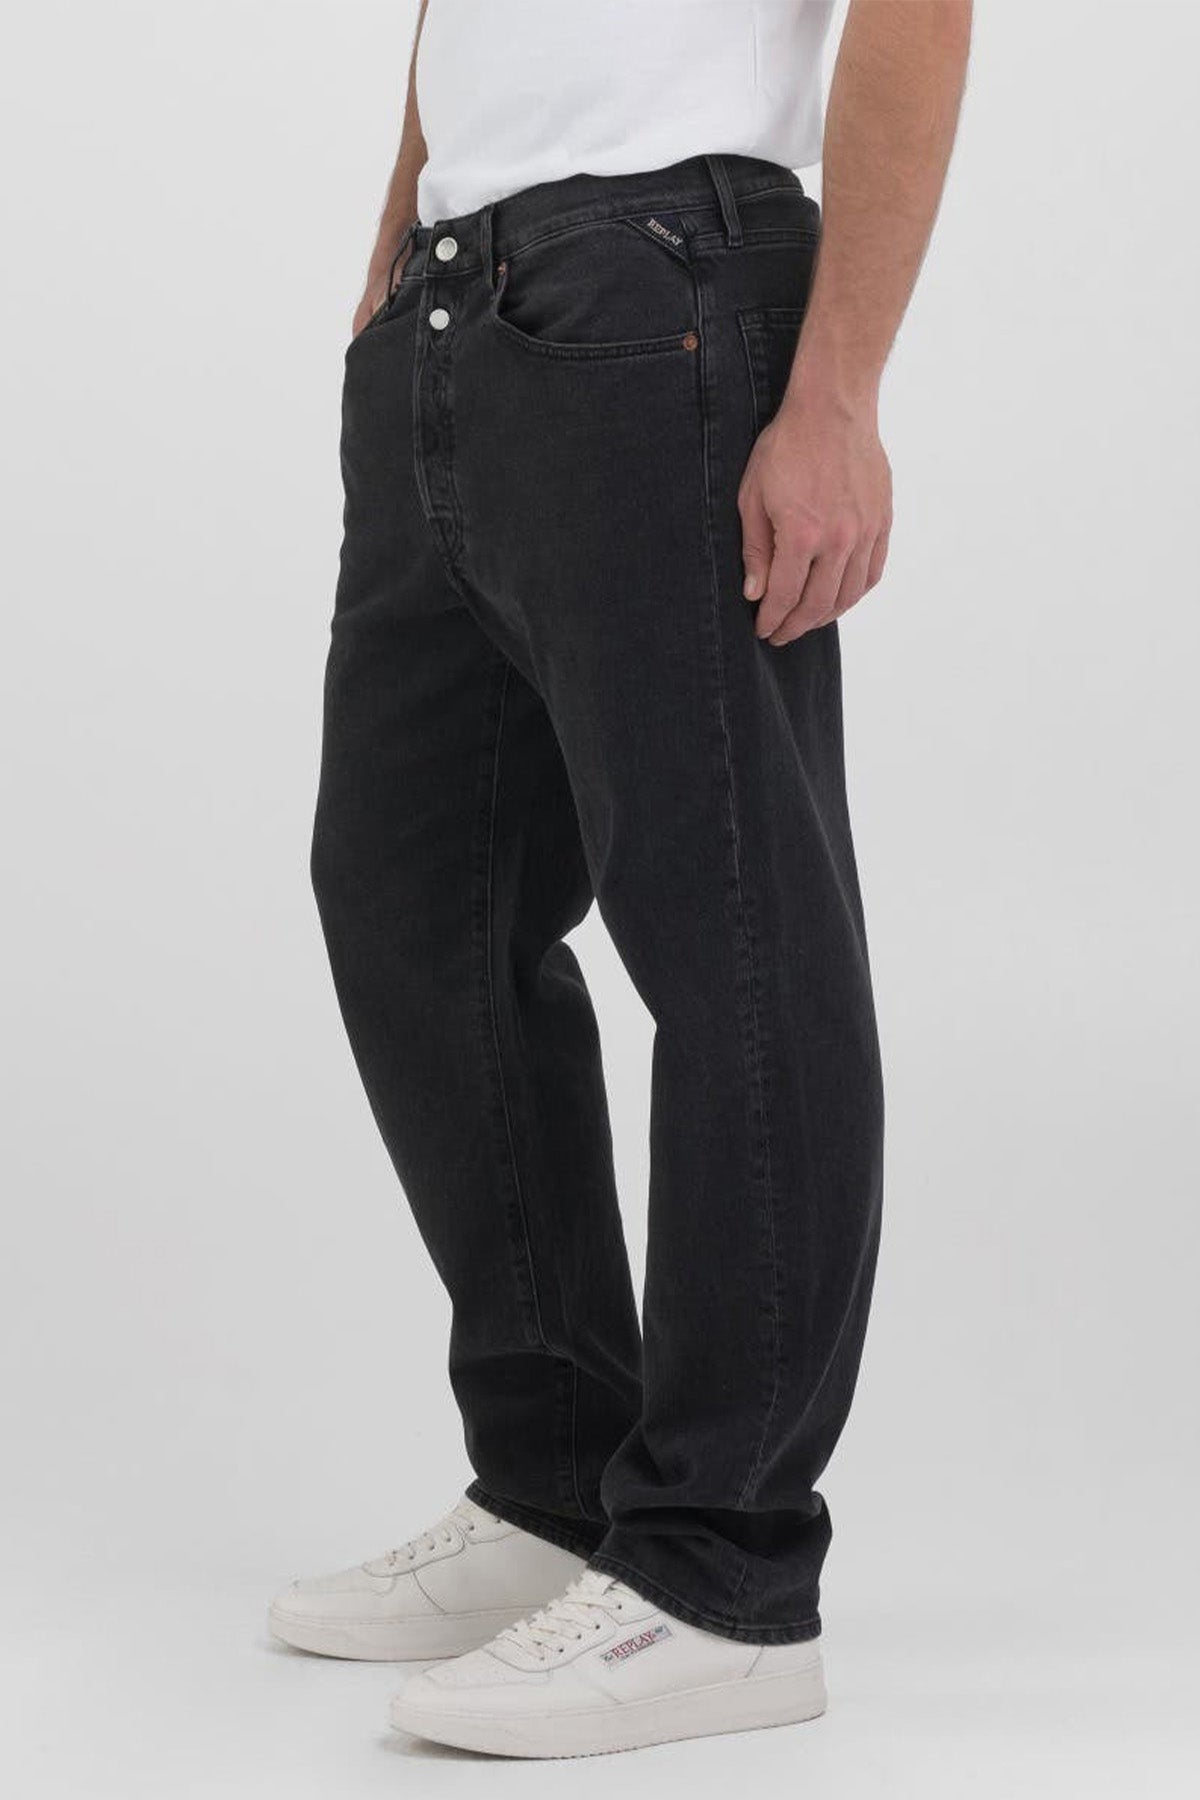 Replay M9Z1 Straight Fit Jeans